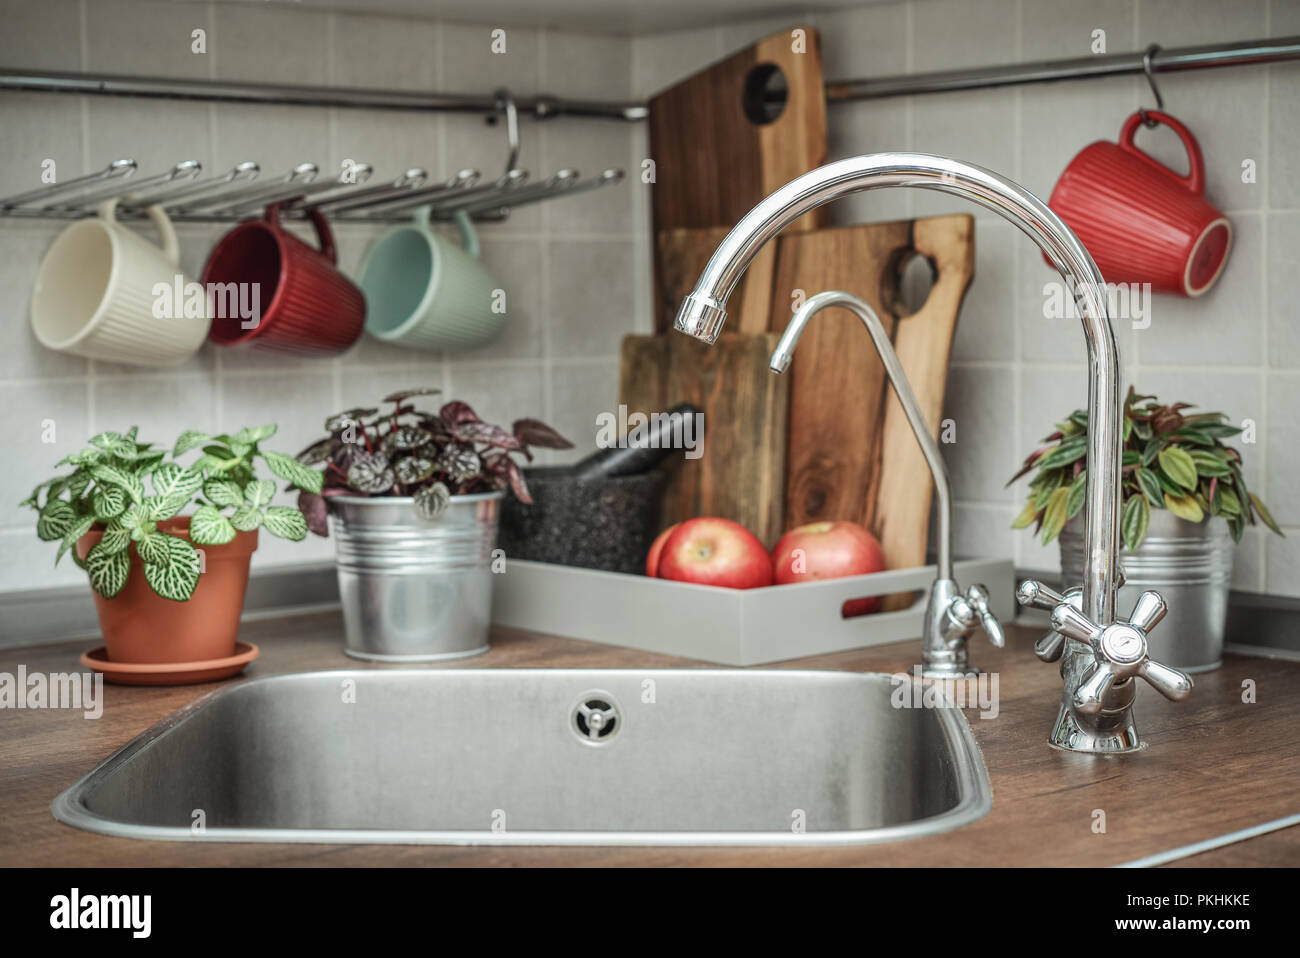 Interior of a modern domestic kitchen with water faucet closeup Stock Photo